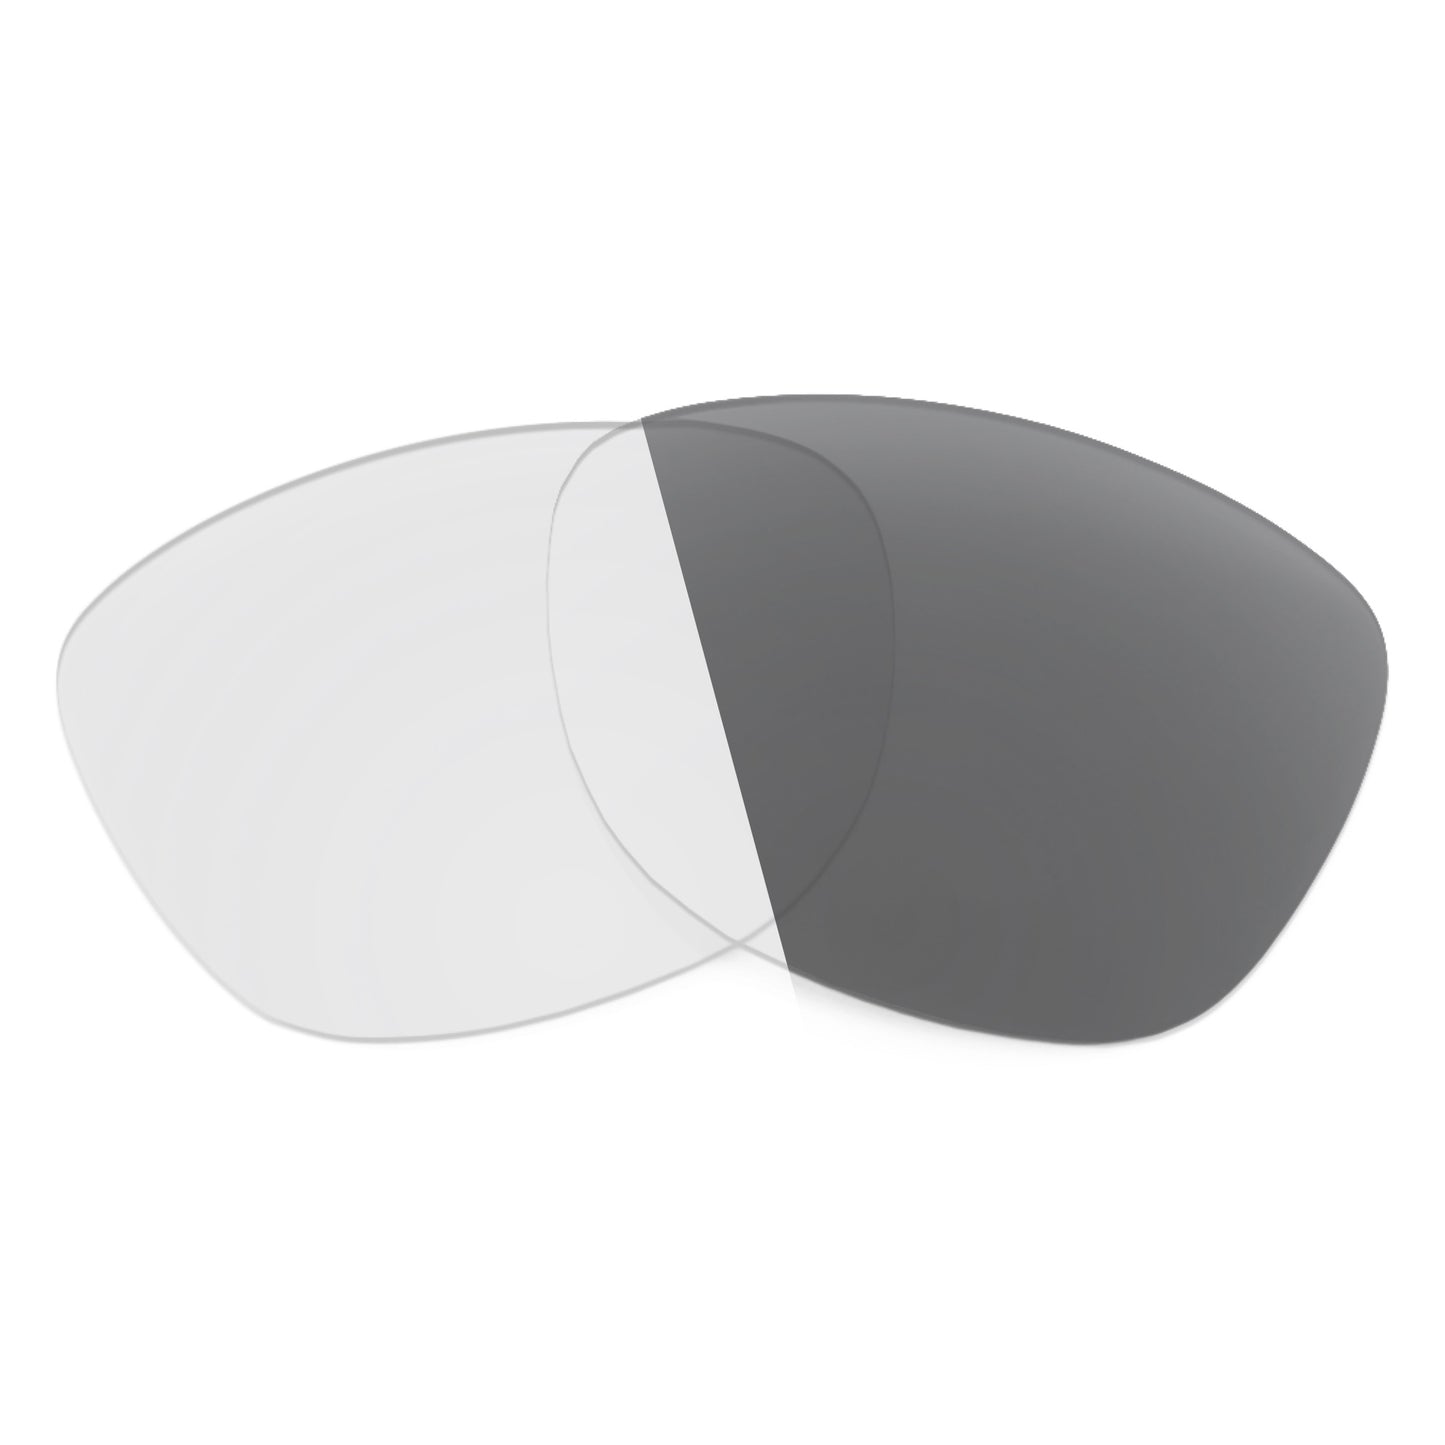 Revant replacement lenses for Ray-Ban RB4258 50mm Non-Polarized Adapt Gray Photochromic